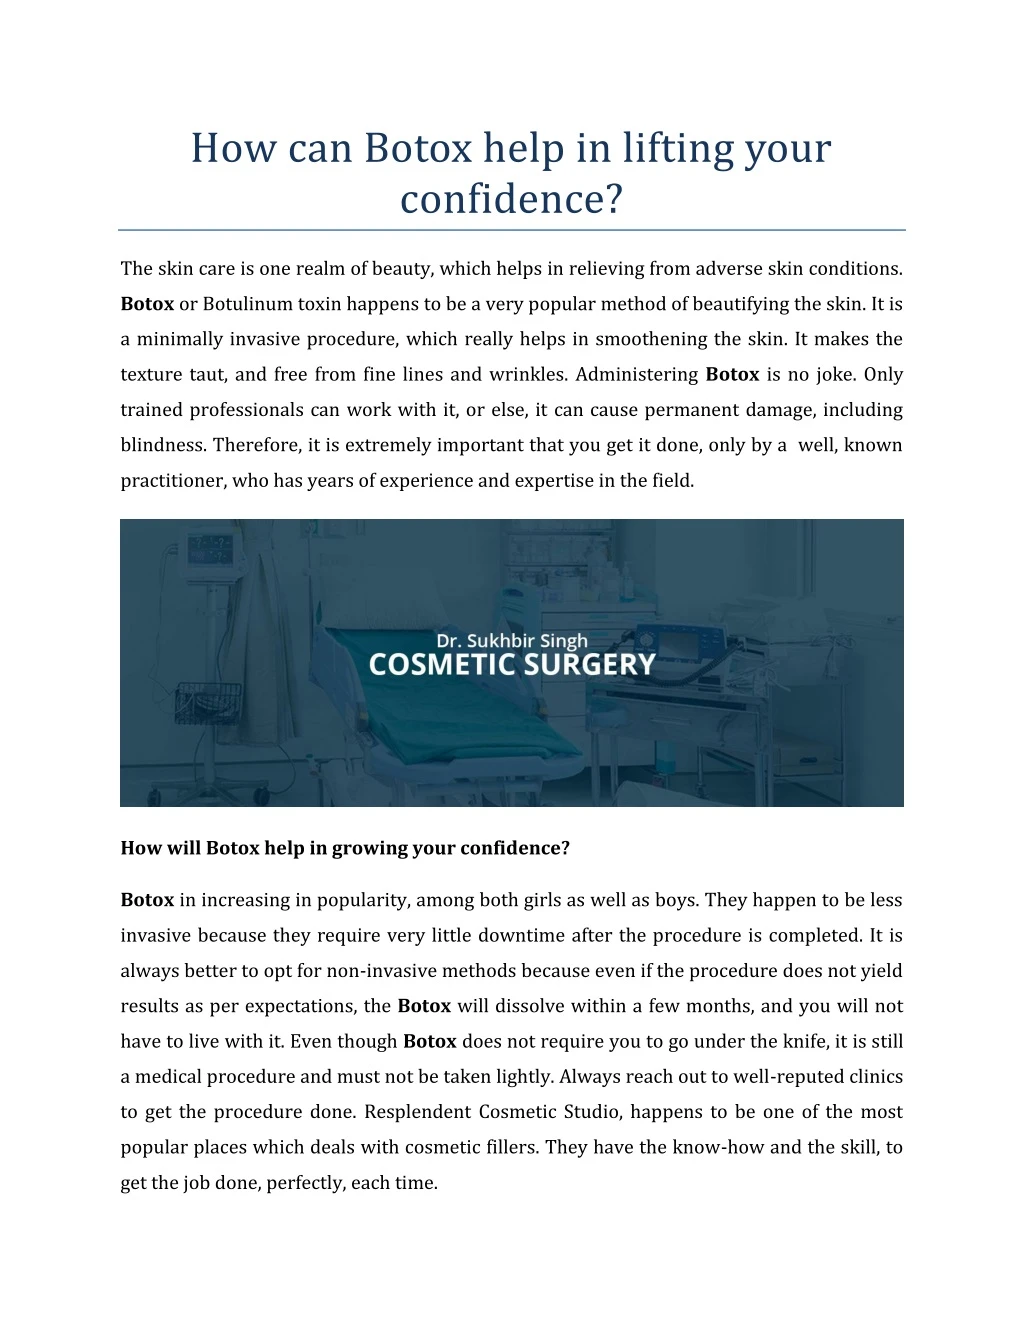 how can botox help in lifting your confidence